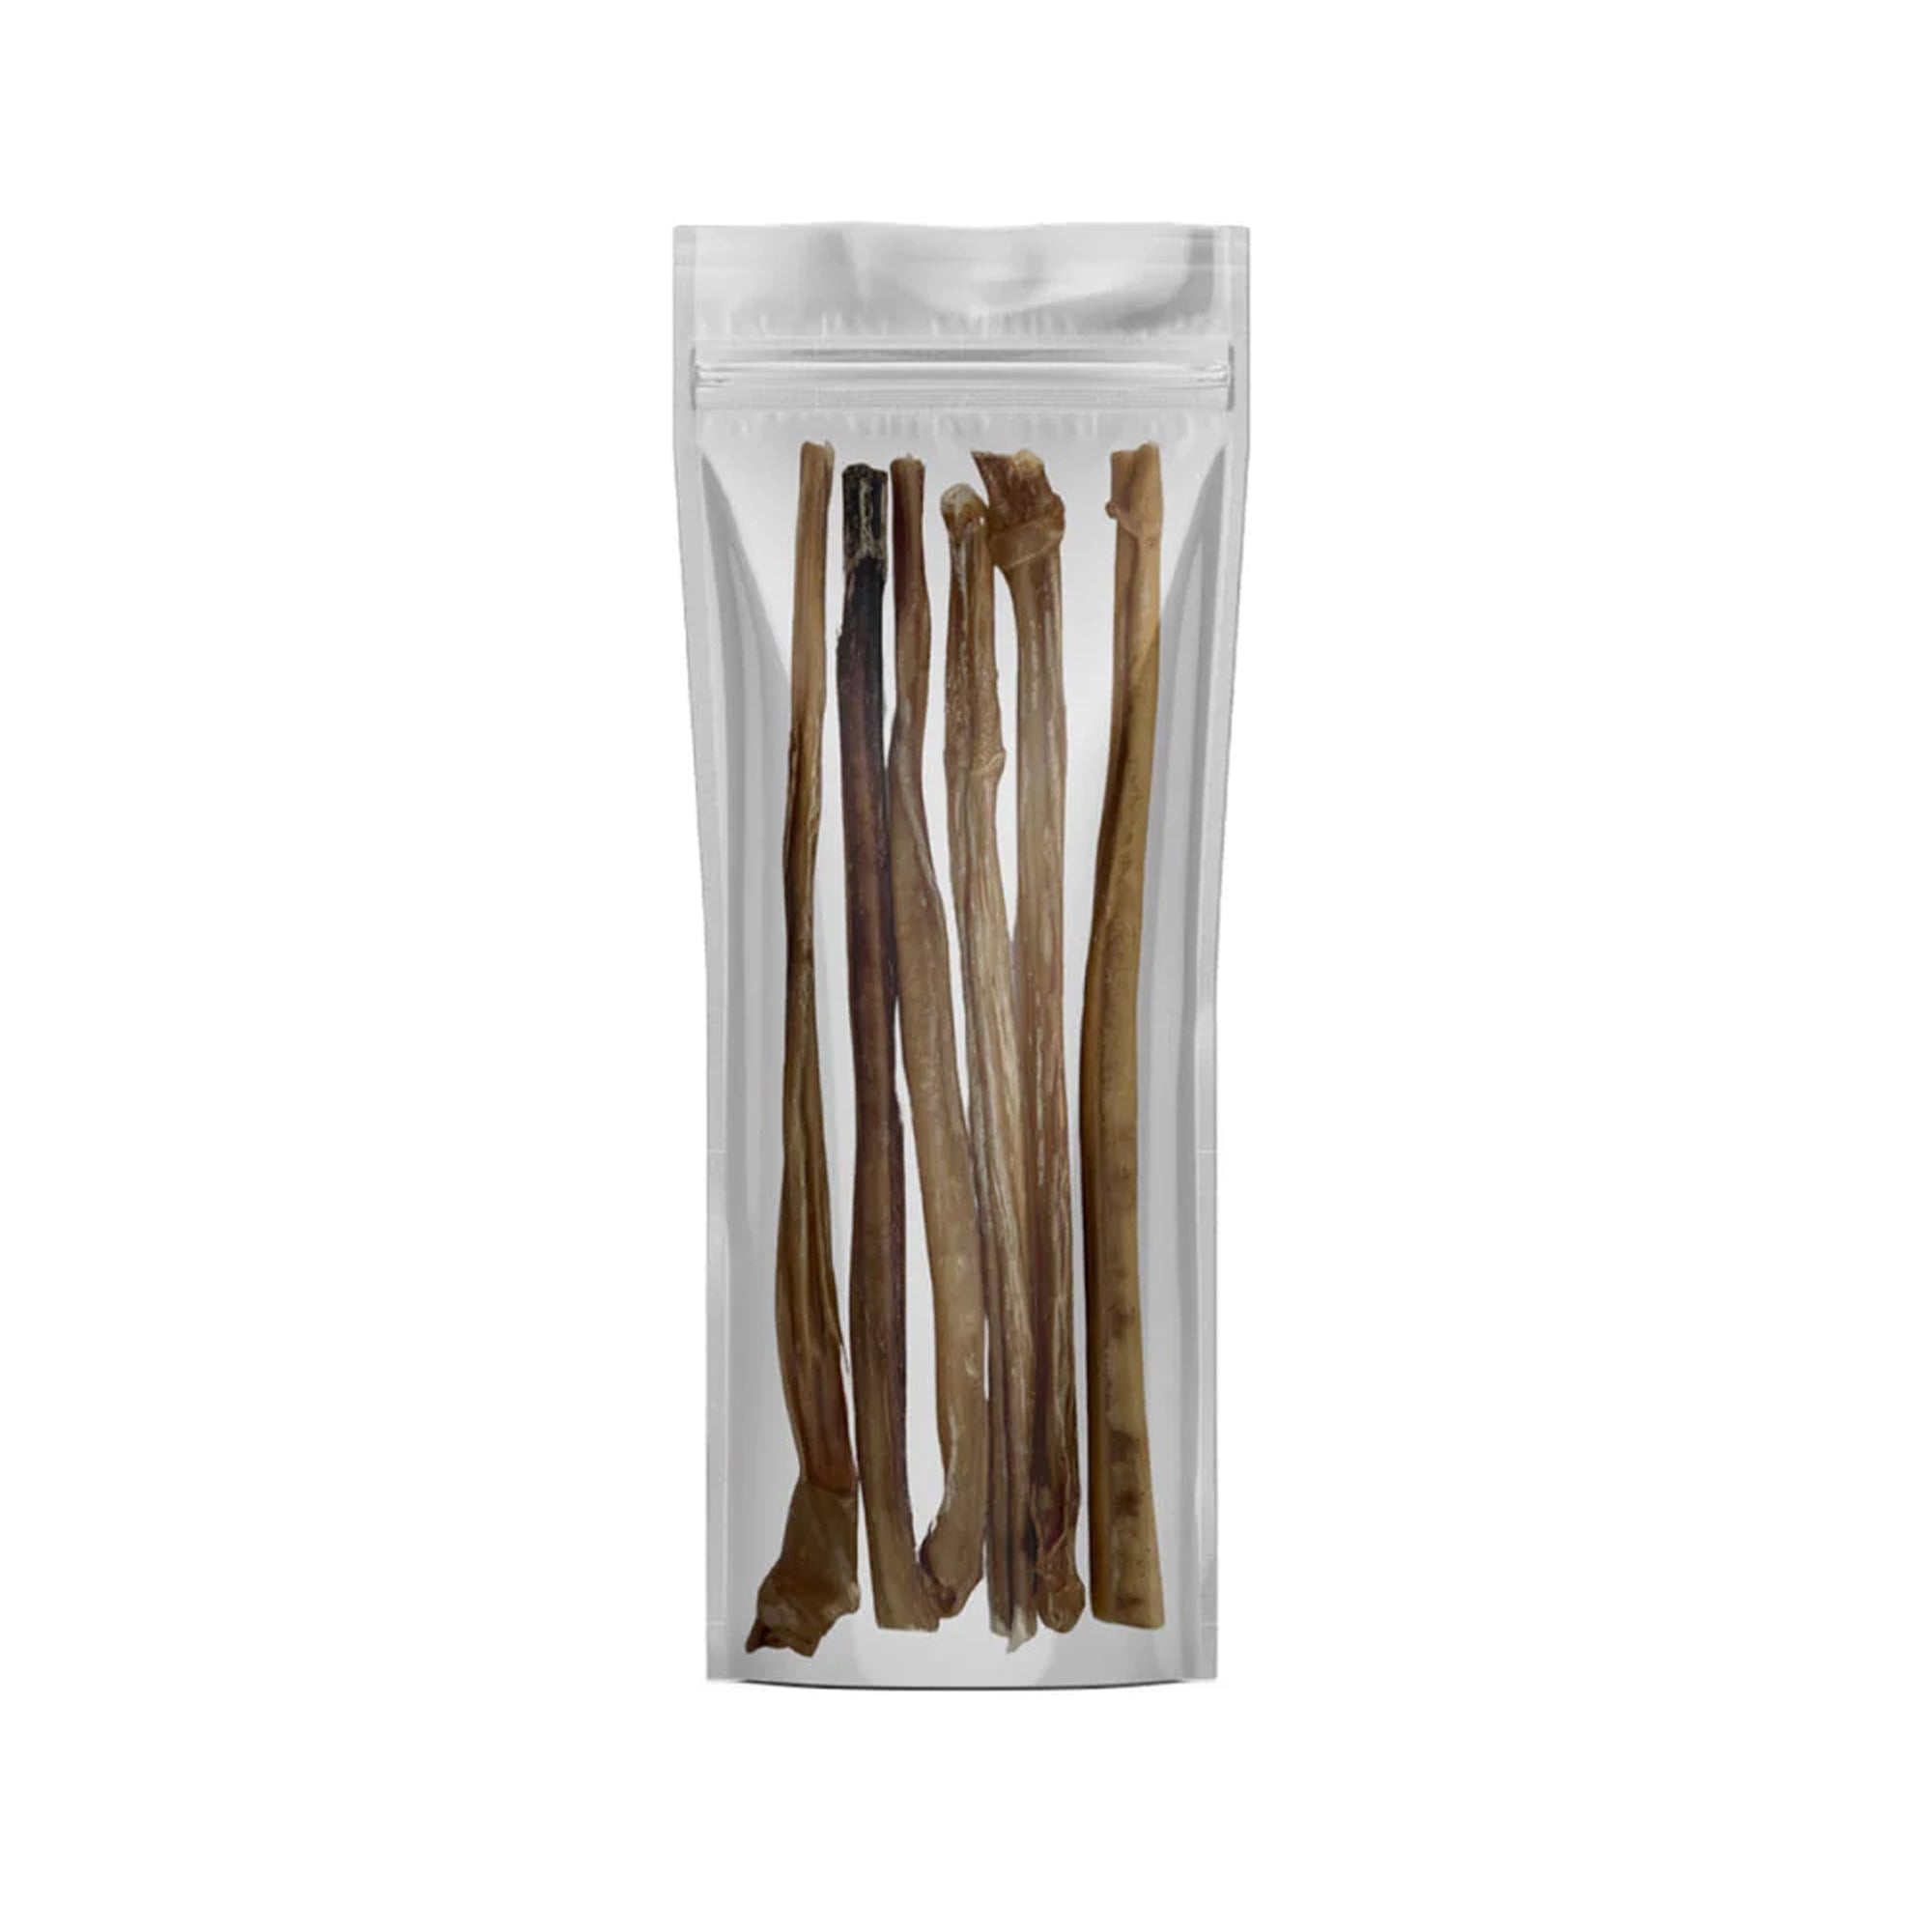 12" Thin Bully Sticks - 6 and 12 Count